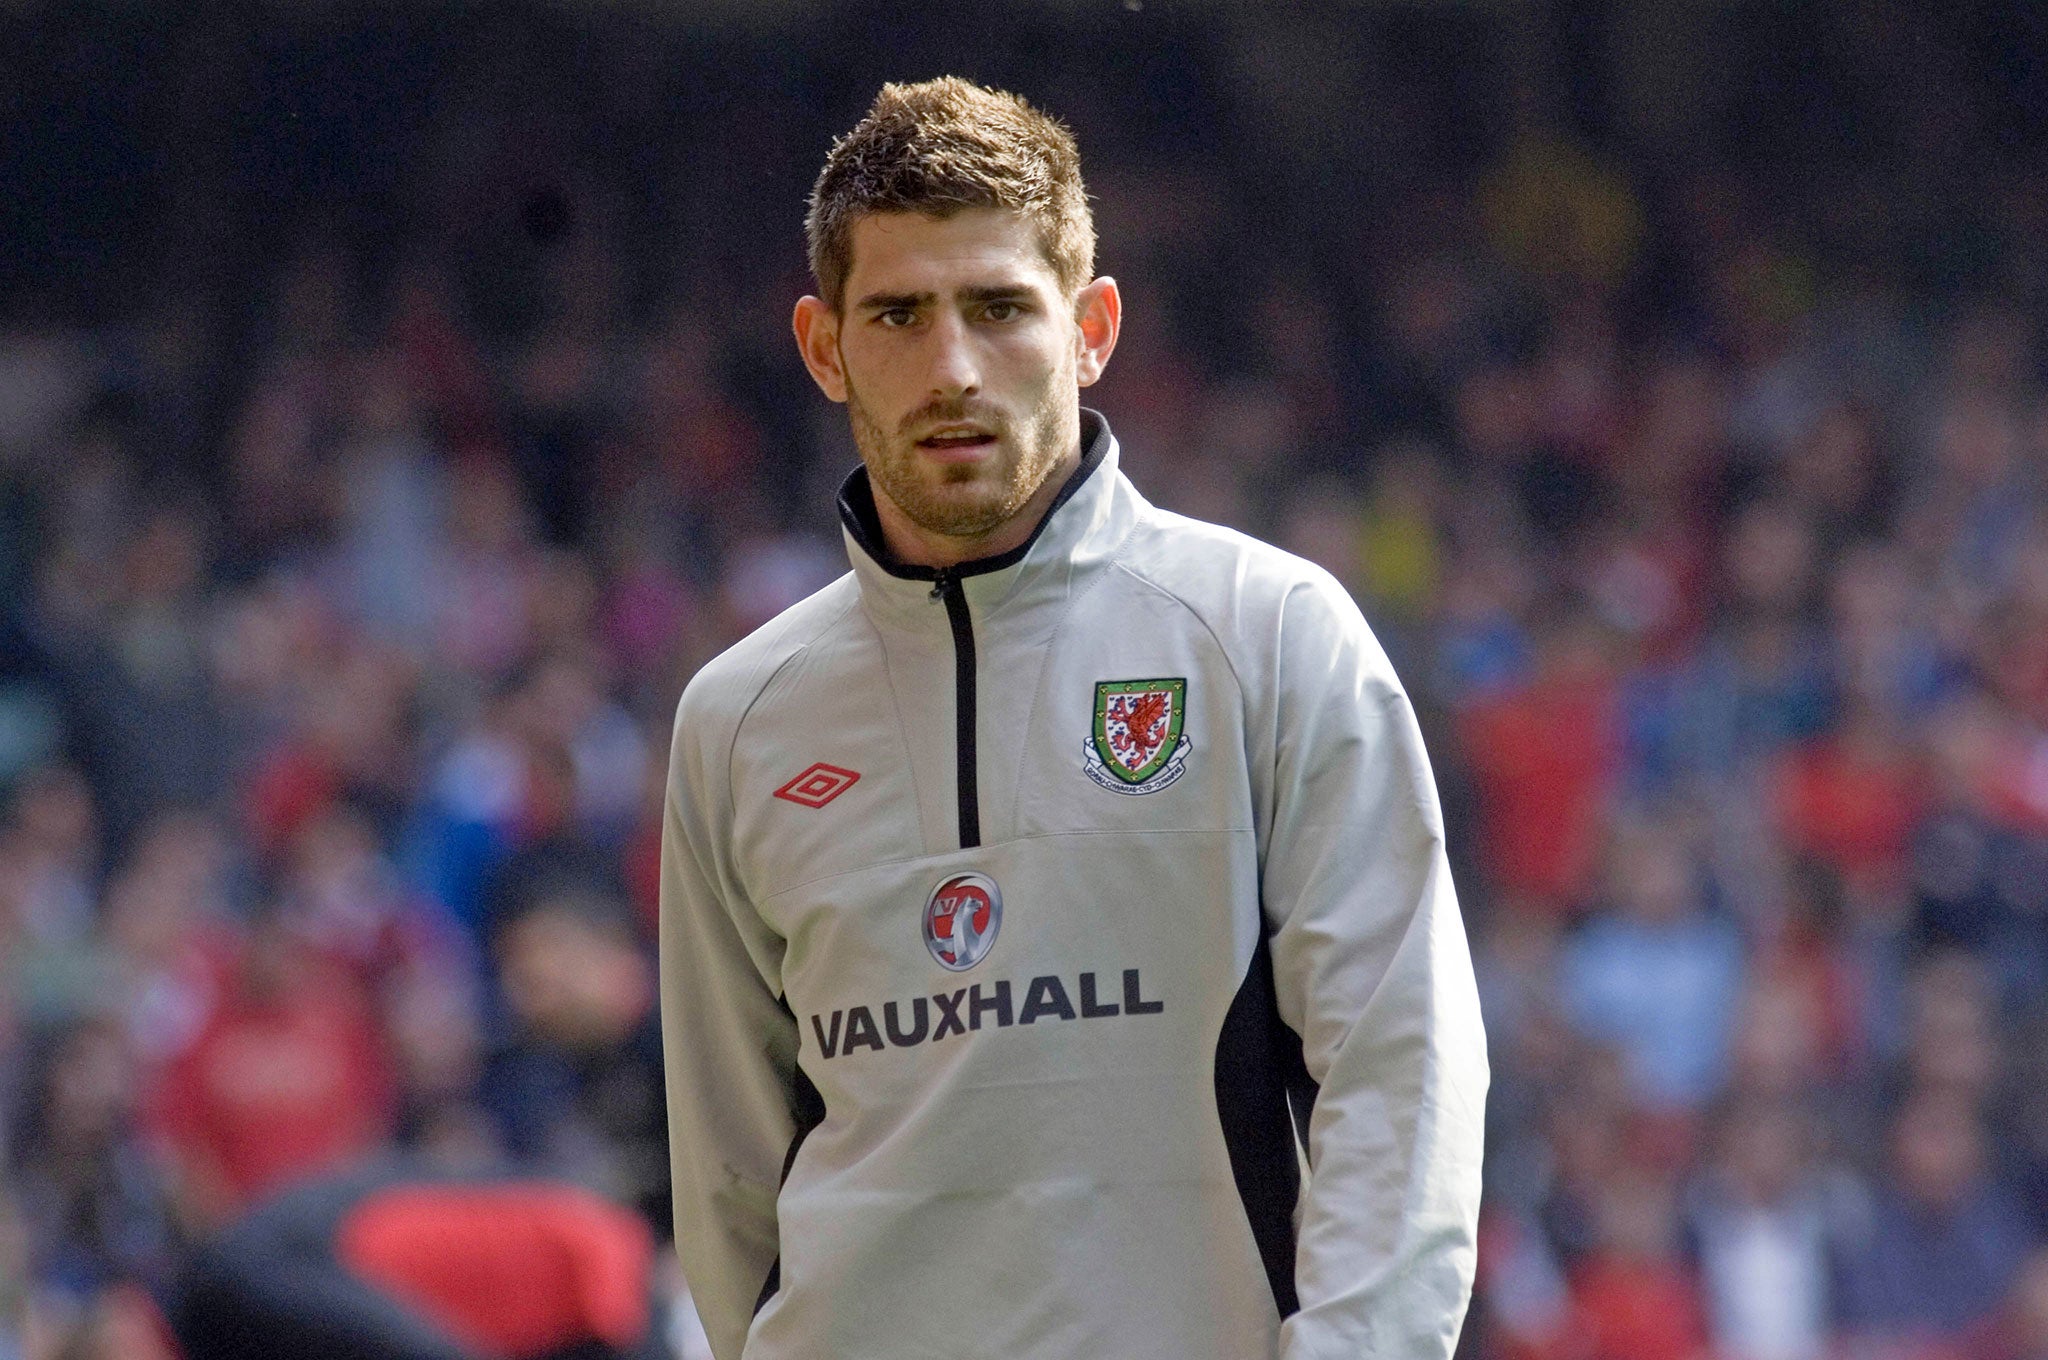 Ched Evans' contract with Sheffied United expired during his incarceration